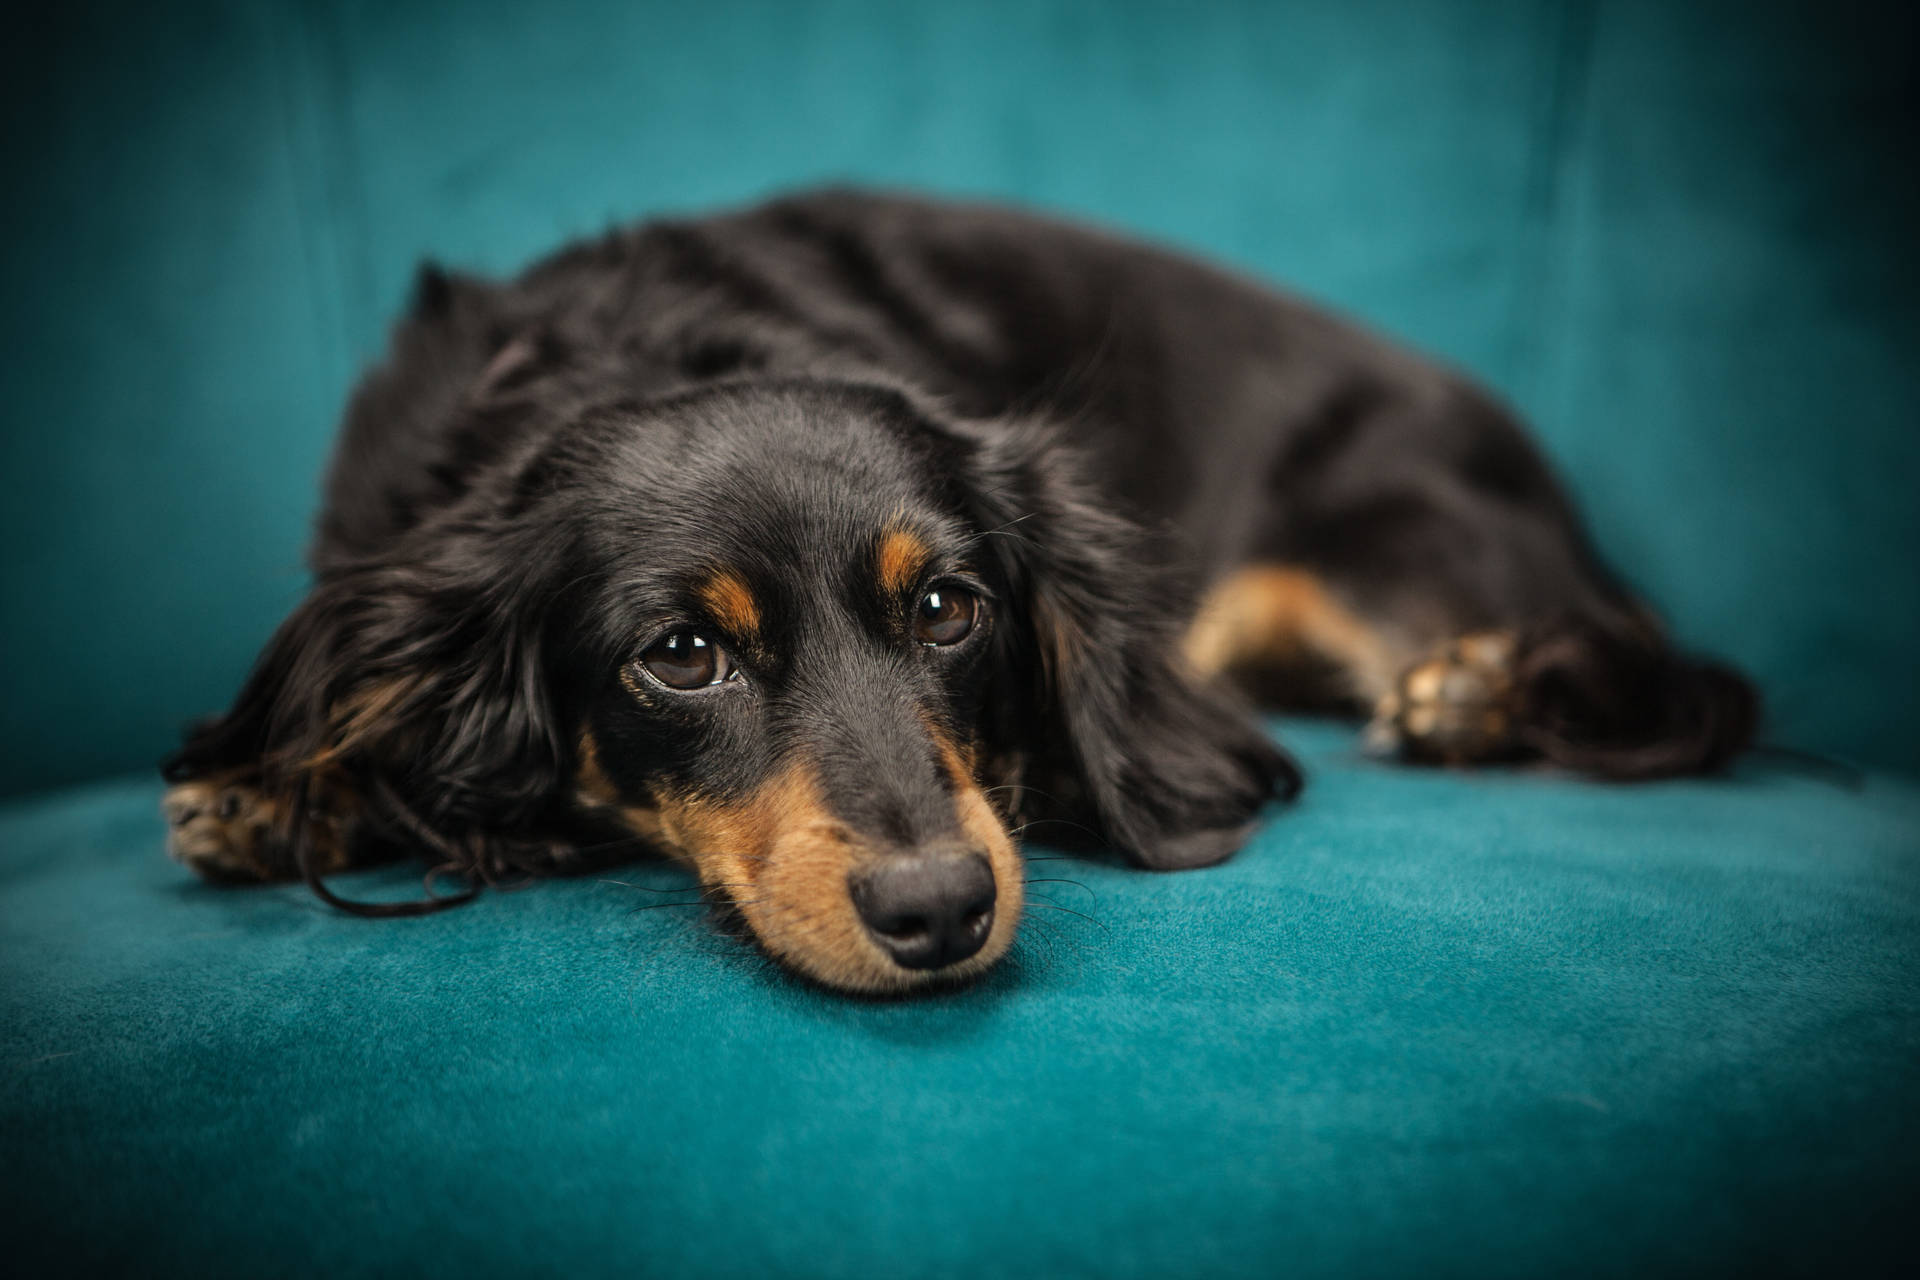 Cute Dog On Blue Couch Background